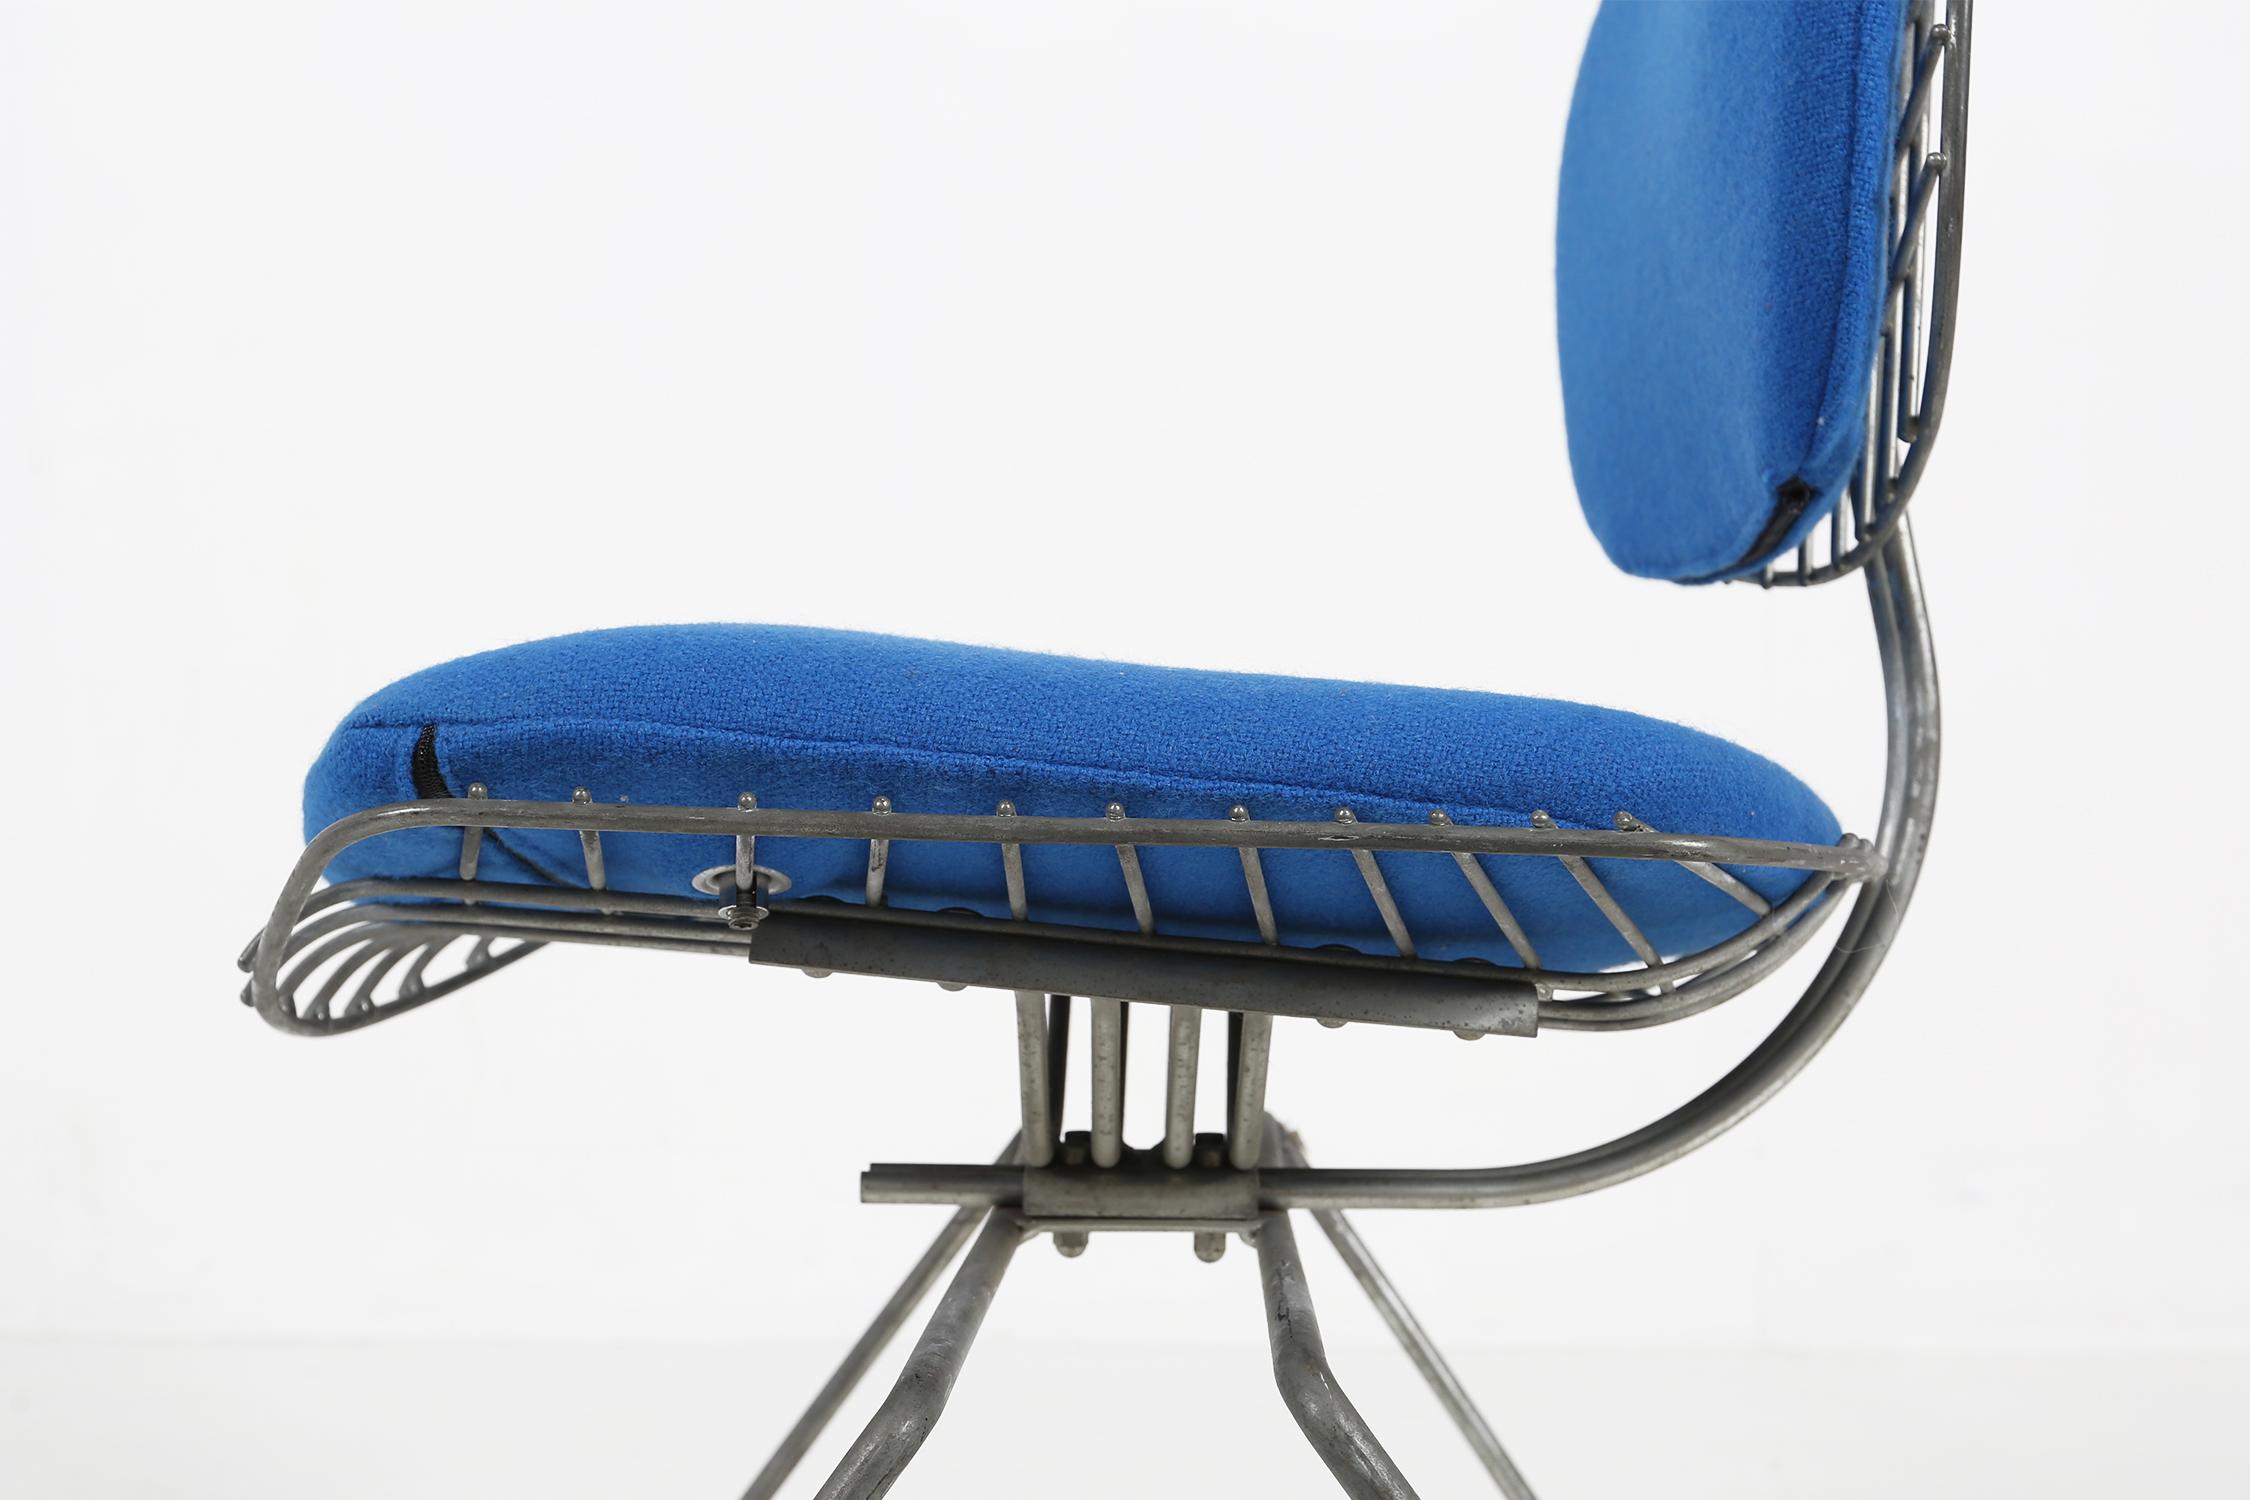 French Beaubourg Chair by Michel Cadestin for Centre Pompidou